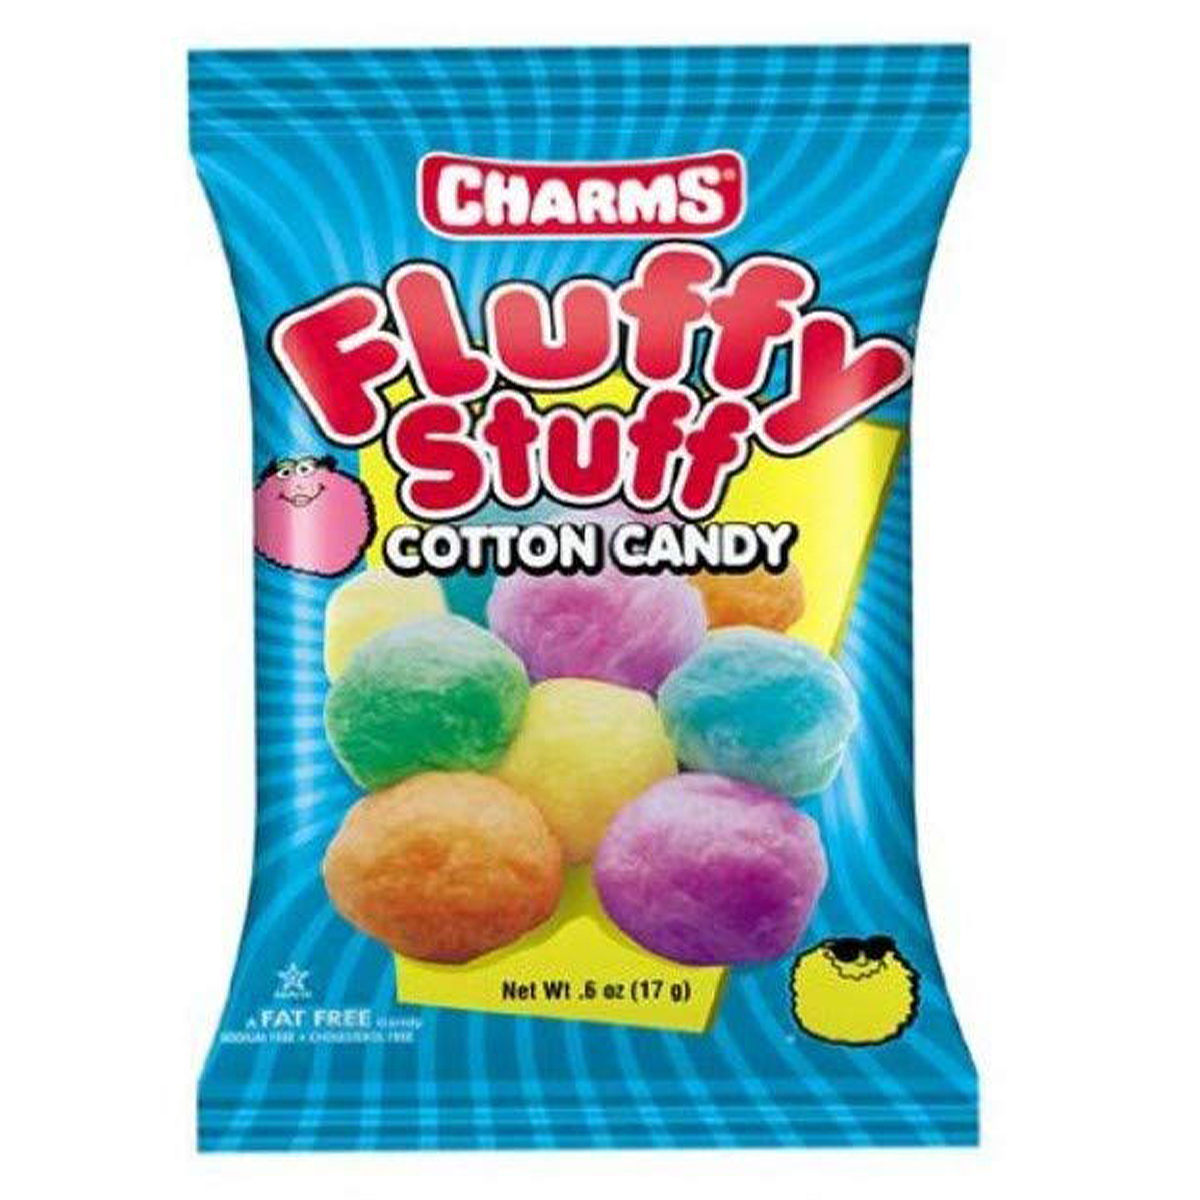 Charms Fluffy Stuff Cotton Candy